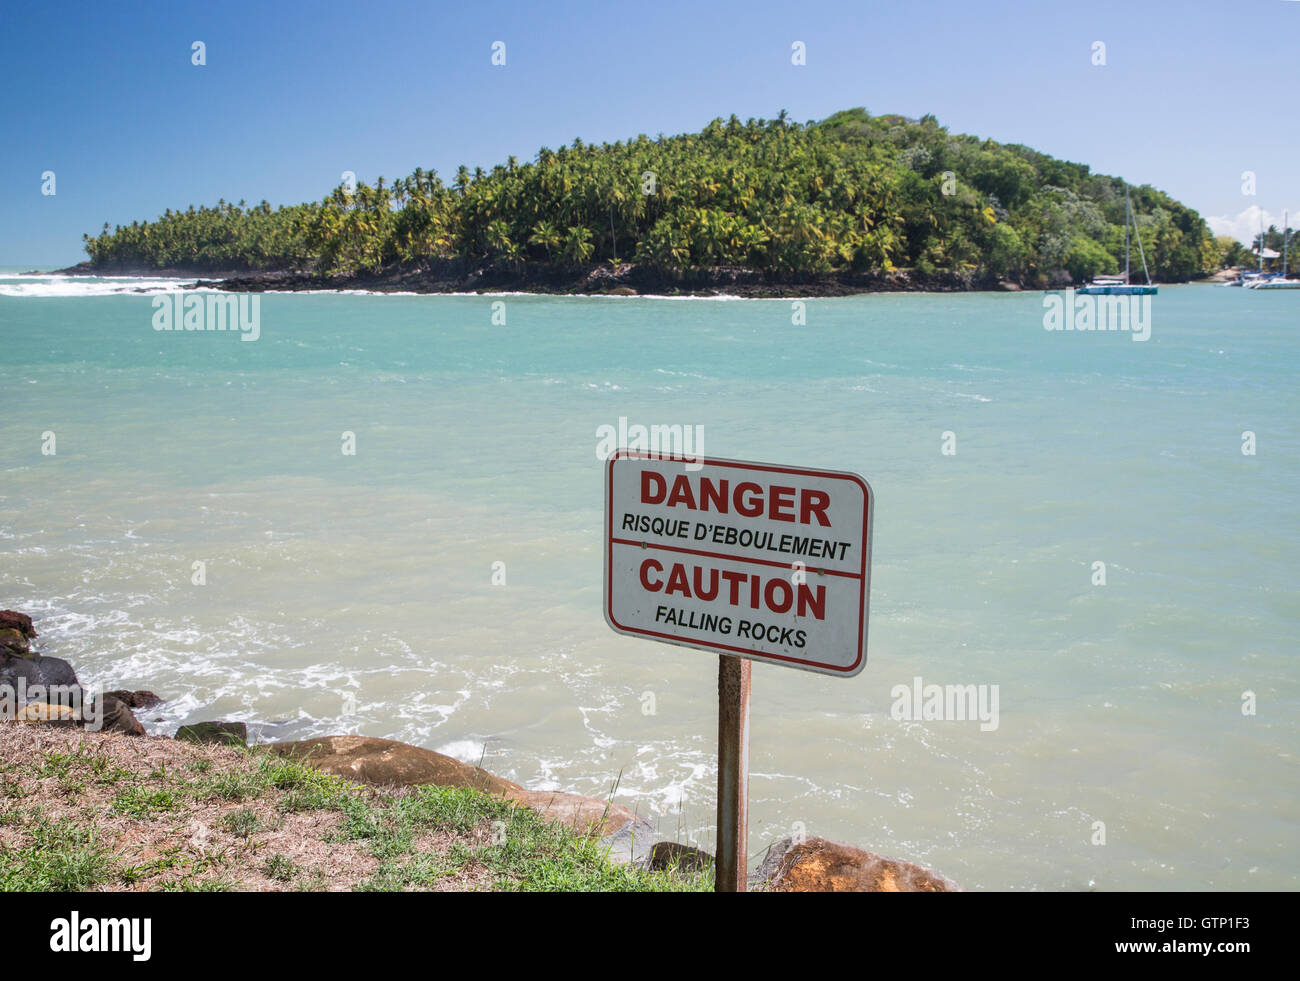 view of Devils Island from Isle Royale, French Guiana Stock Photo